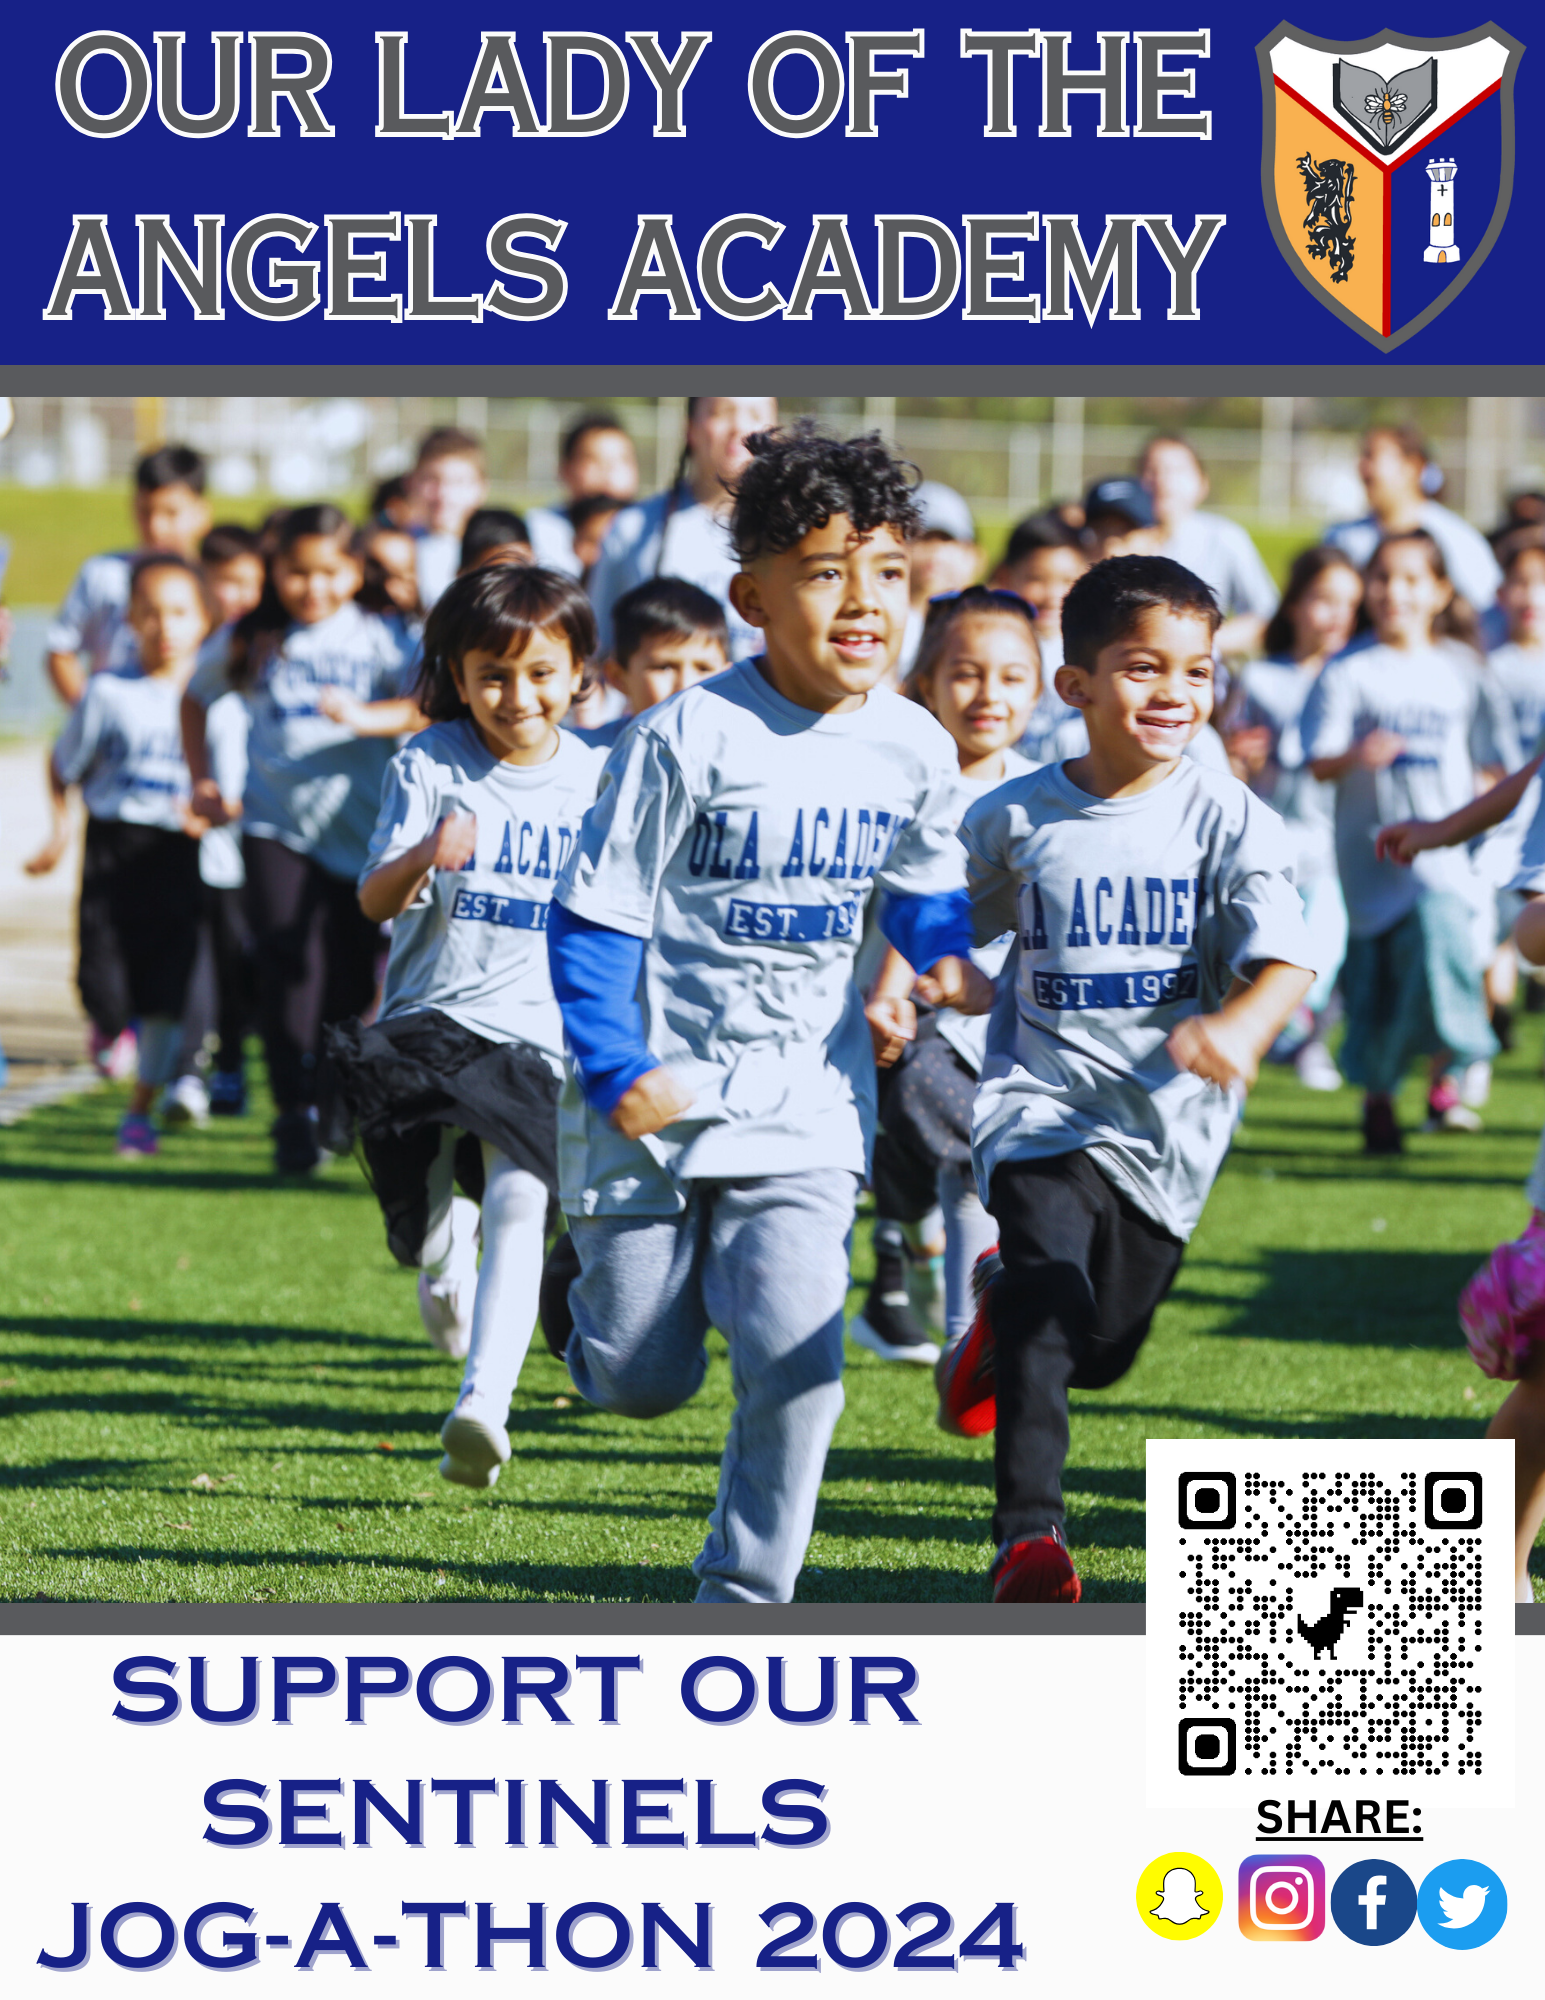 Our Lady of the Angels 2023 jog-a-thon